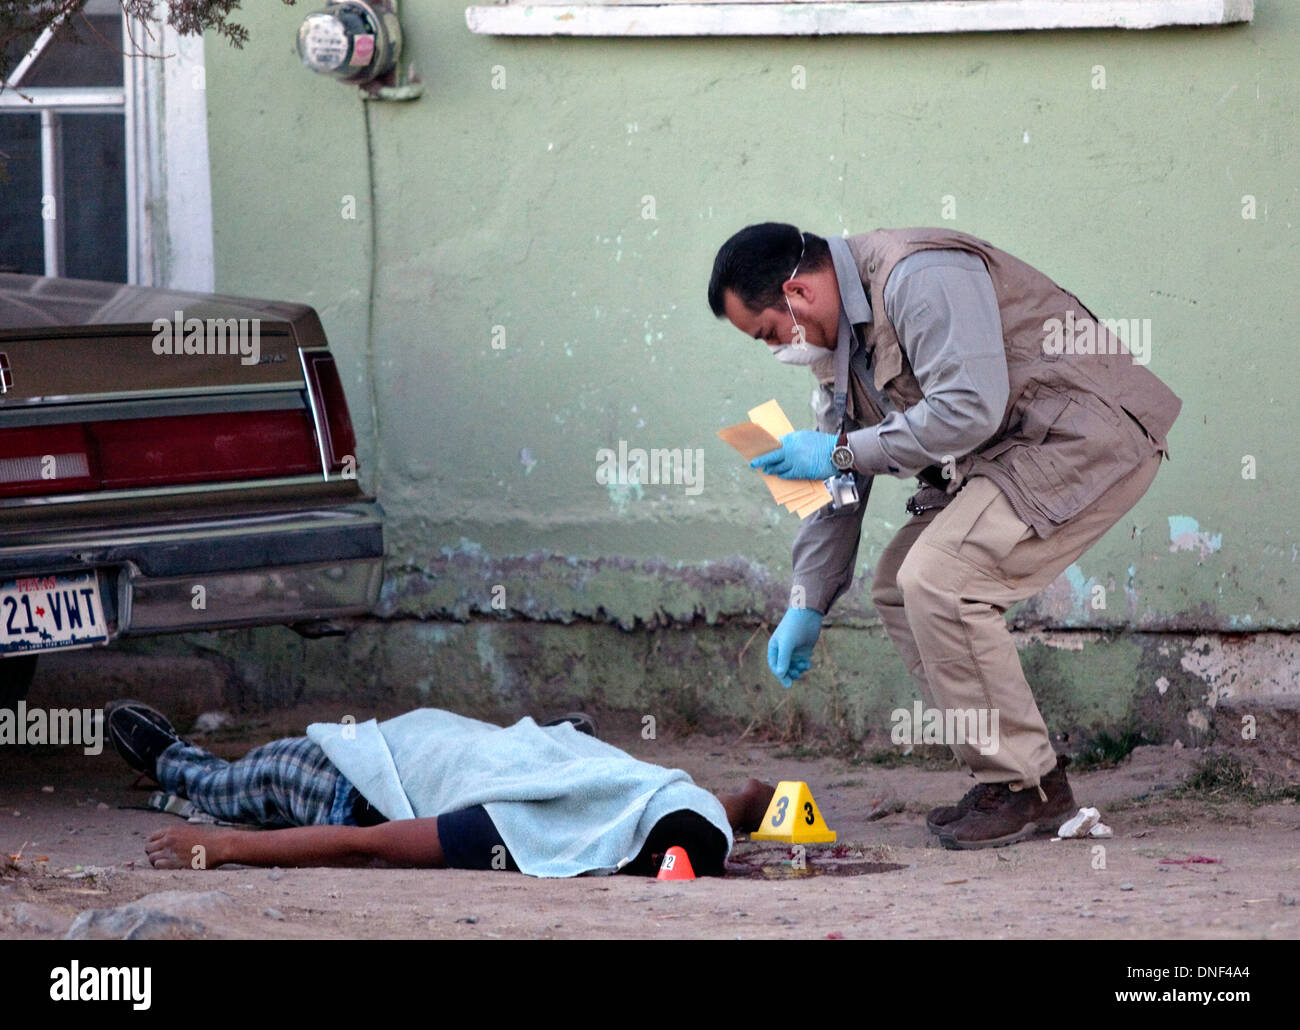 Police investigators at the scene of a drug related shoot out in a slum January 14, 2009 in Juarez, Mexico. The shooting, believed linked to the ongoing drug war which has already claimed more than 40 people since the start of the year. More than 1600 people were killed in Juarez in 2008, making Juarez the most violent city in Mexico. Stock Photo